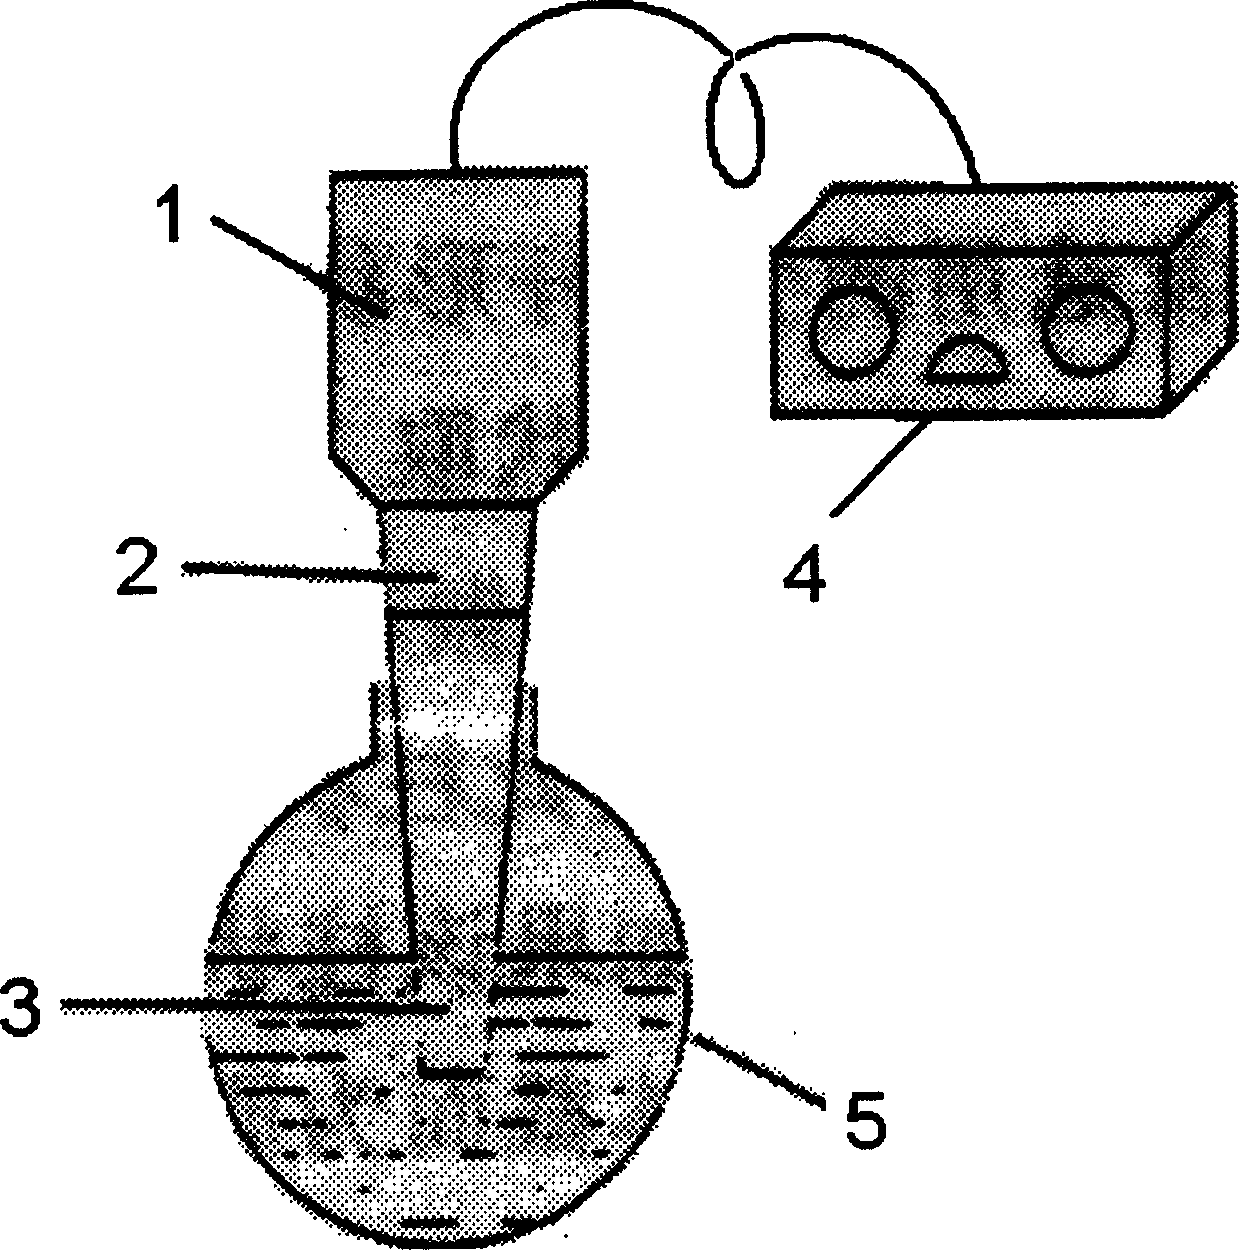 Hydrofining catalyst containing molybdenum and/or tungsten and nickel and/or cobalt and its preparation process